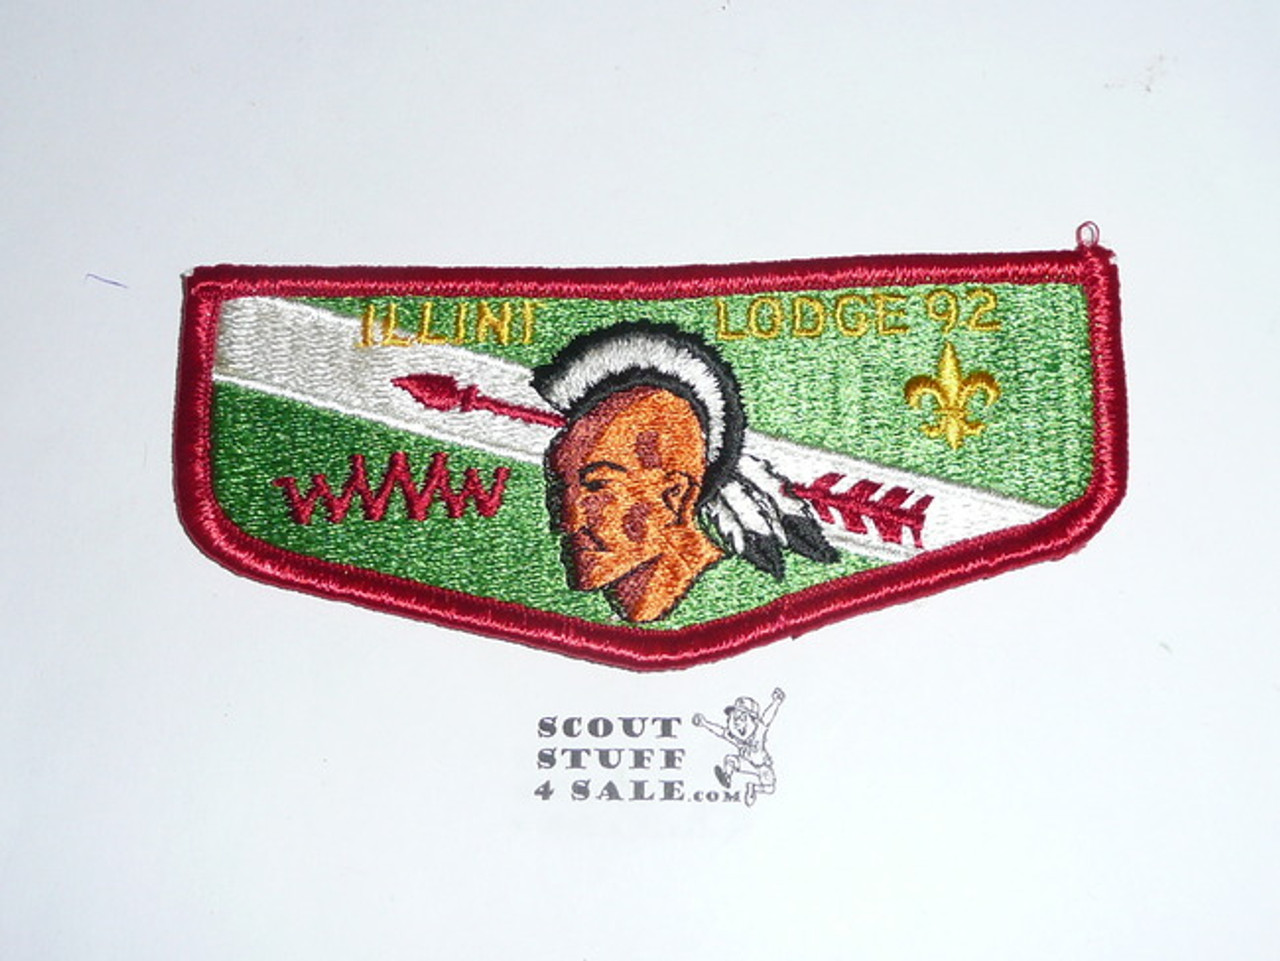 Order of the Arrow Lodge #92 Illini s12 Flap Patch